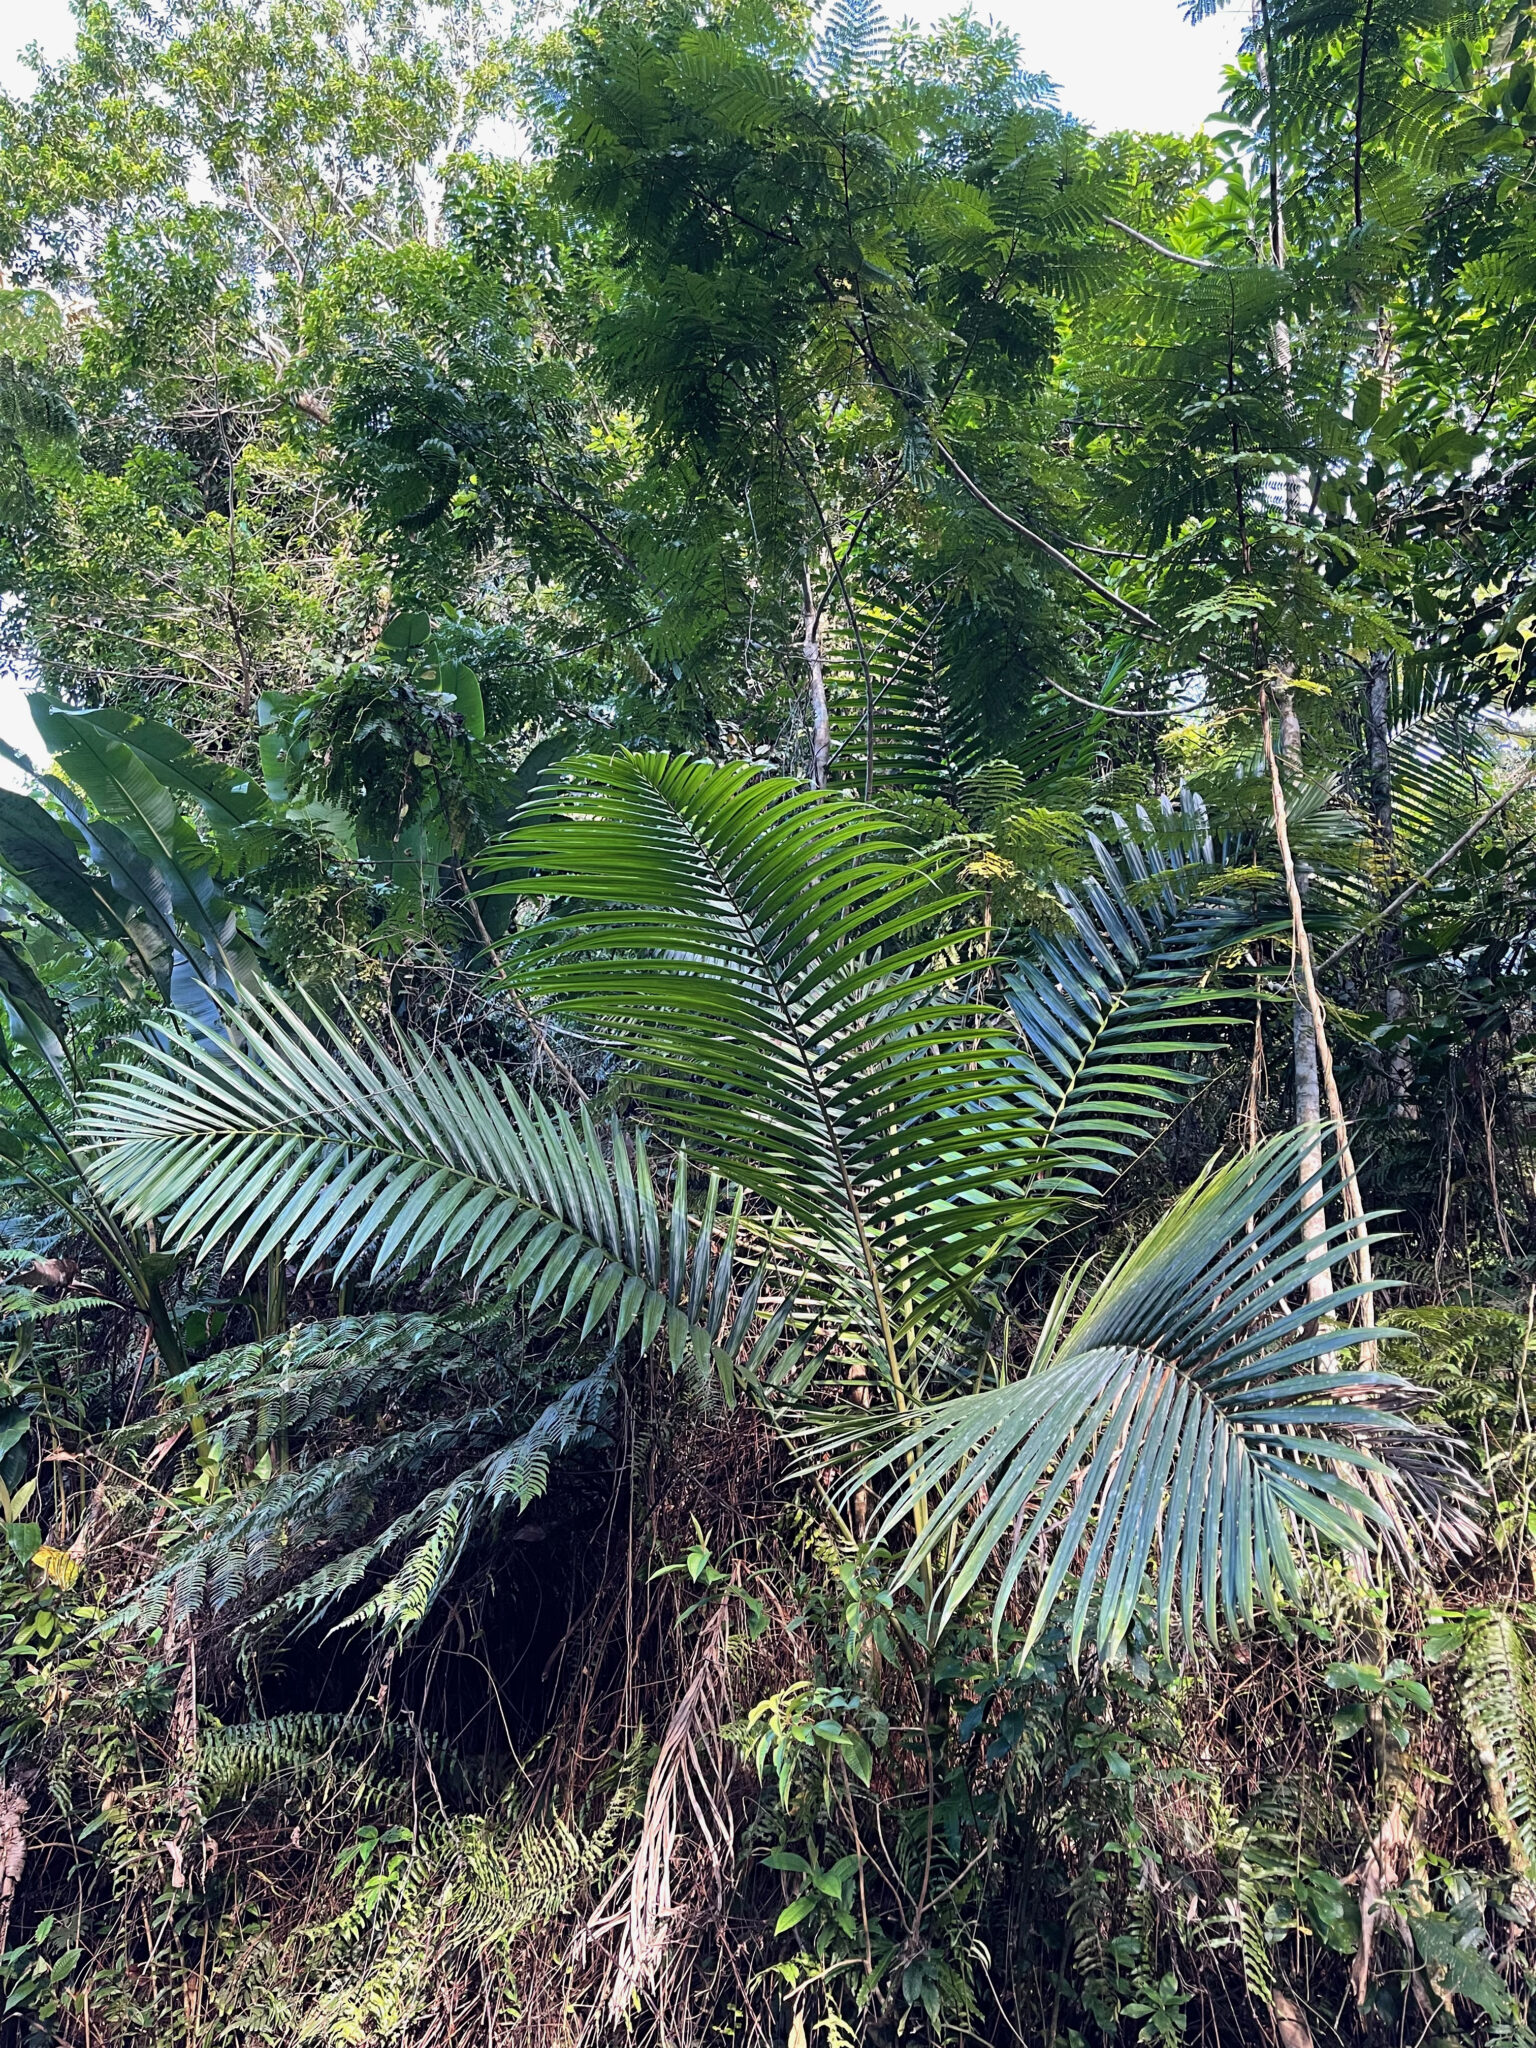 Native palm tree in El Yunque National Forest. Photo by ConsumerMojo.com 